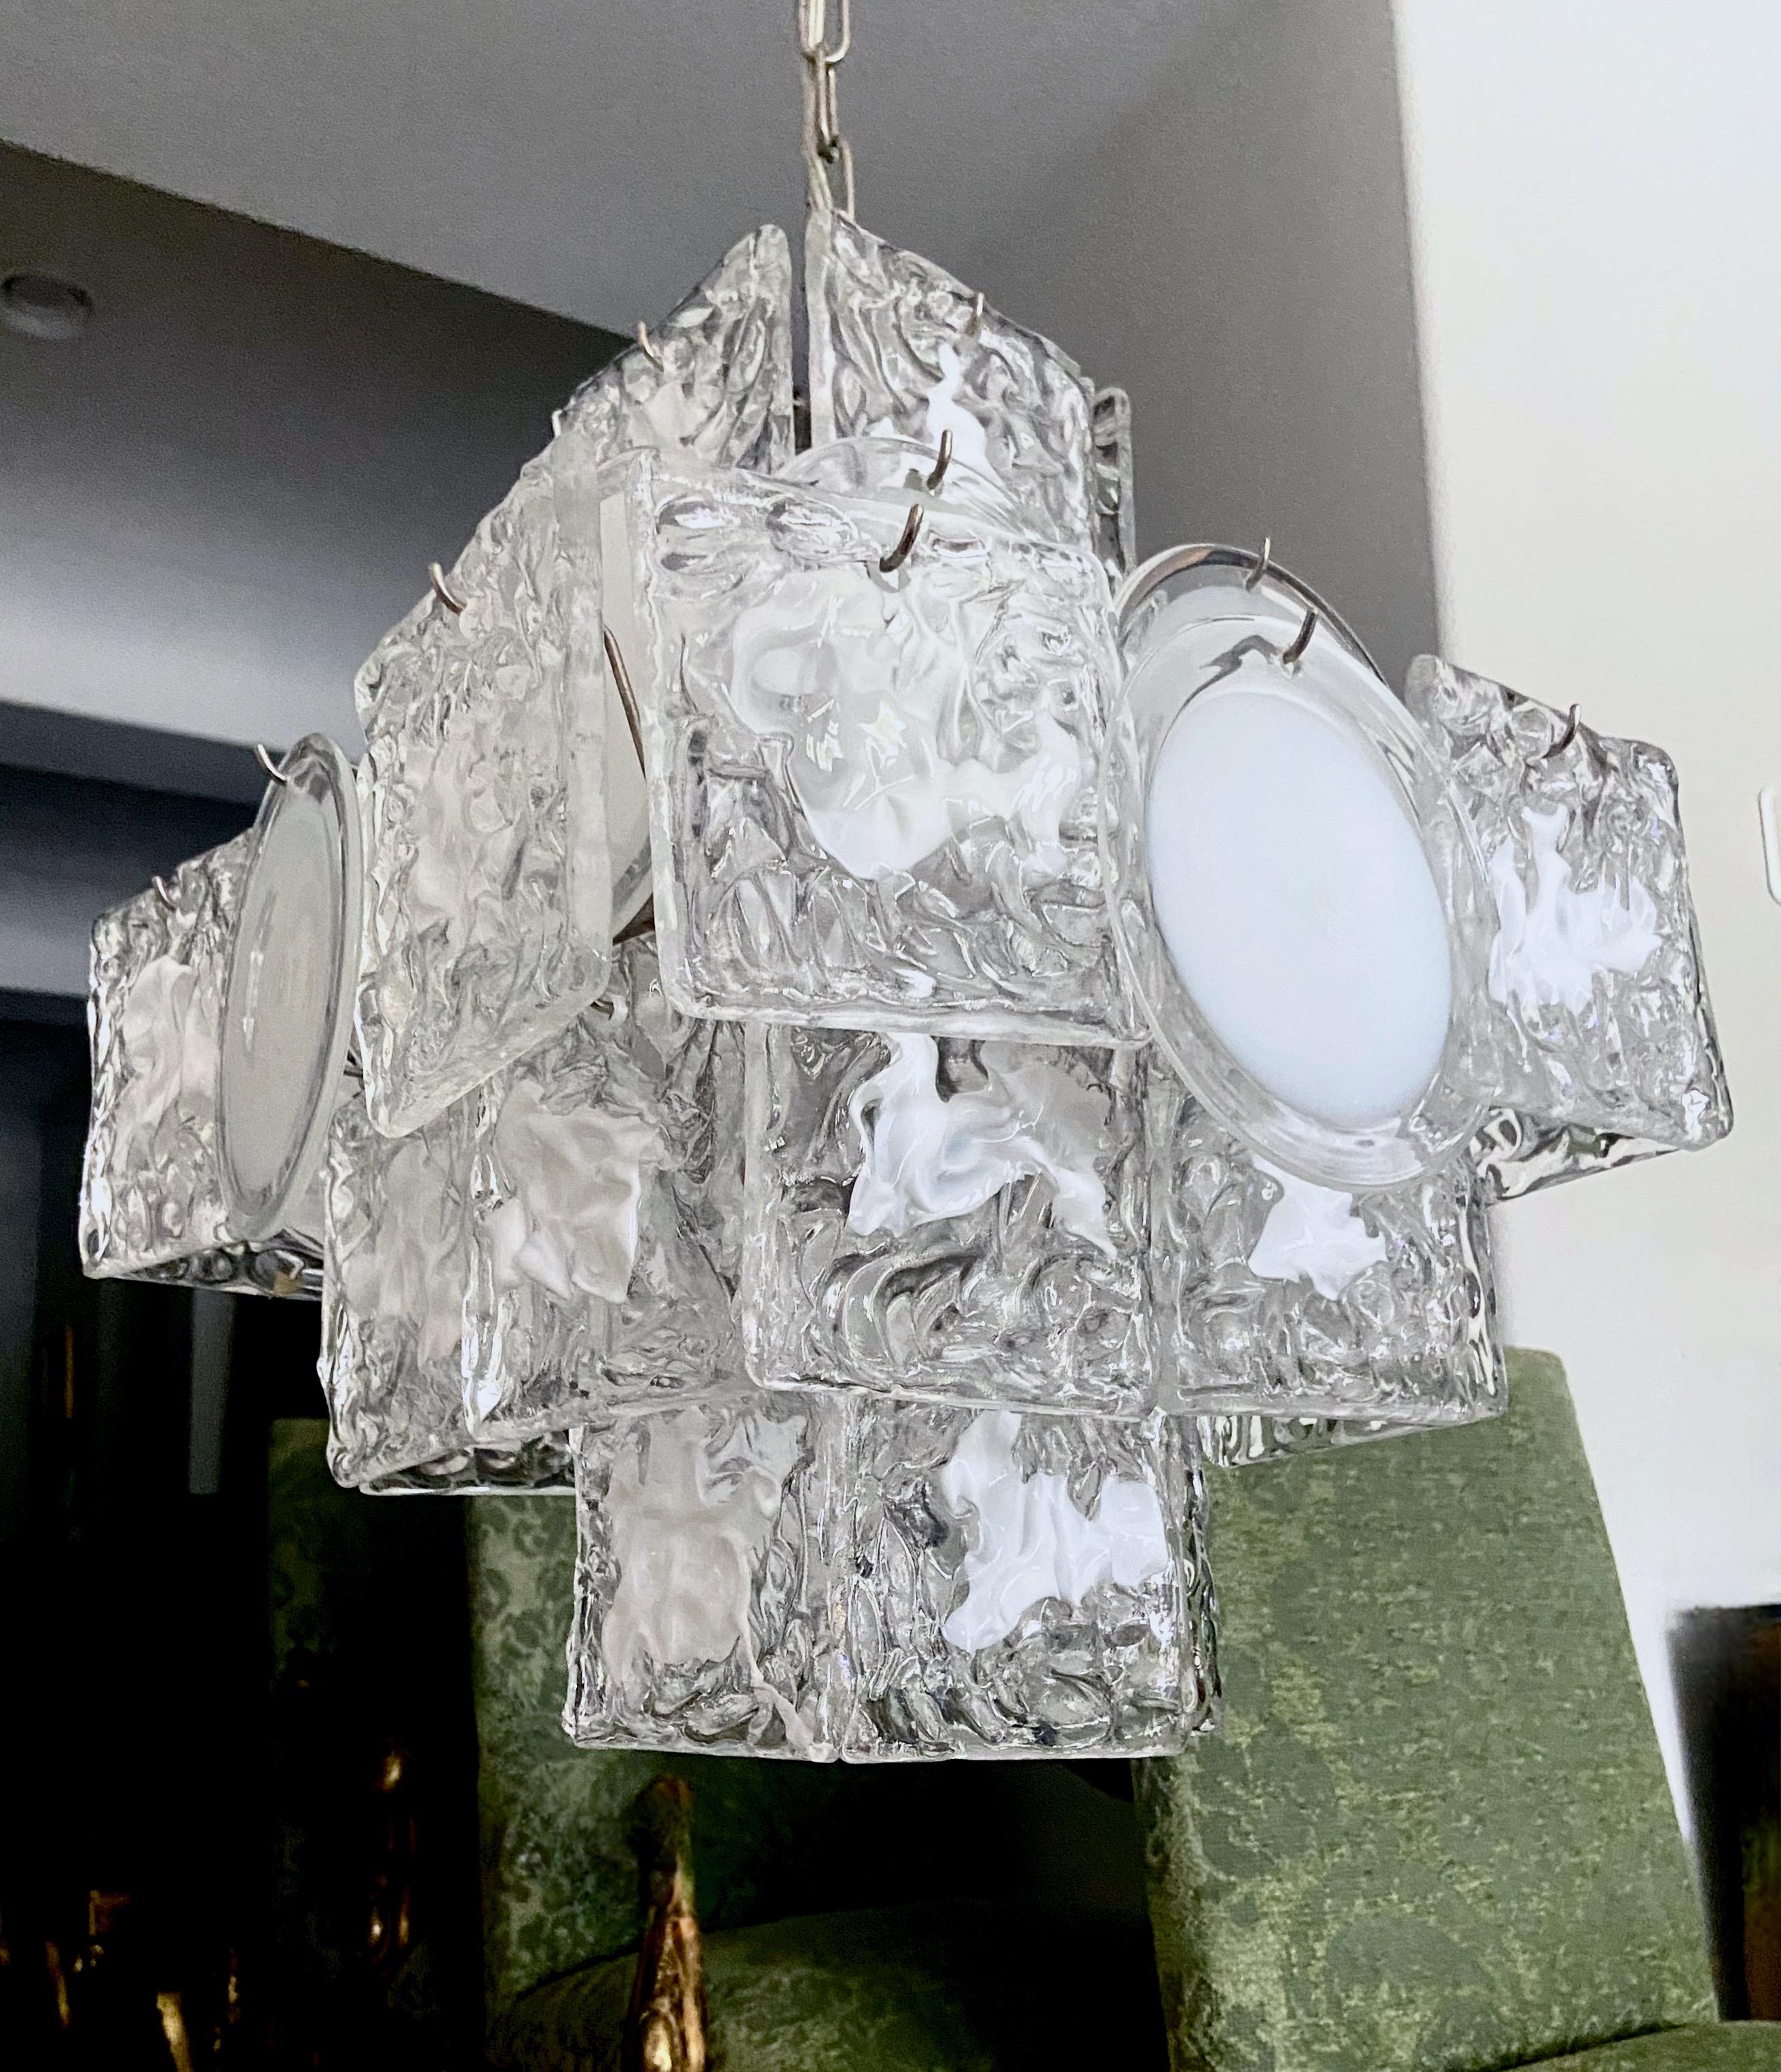 Murano Italian hand blown white and clear glass 4 light square shaped chandelier. The chandelier has 2 styles of alternating glass, Vistosi round clear and white discs, and Mazzega square textured clear and white squiggly pattern discs. Steel frame